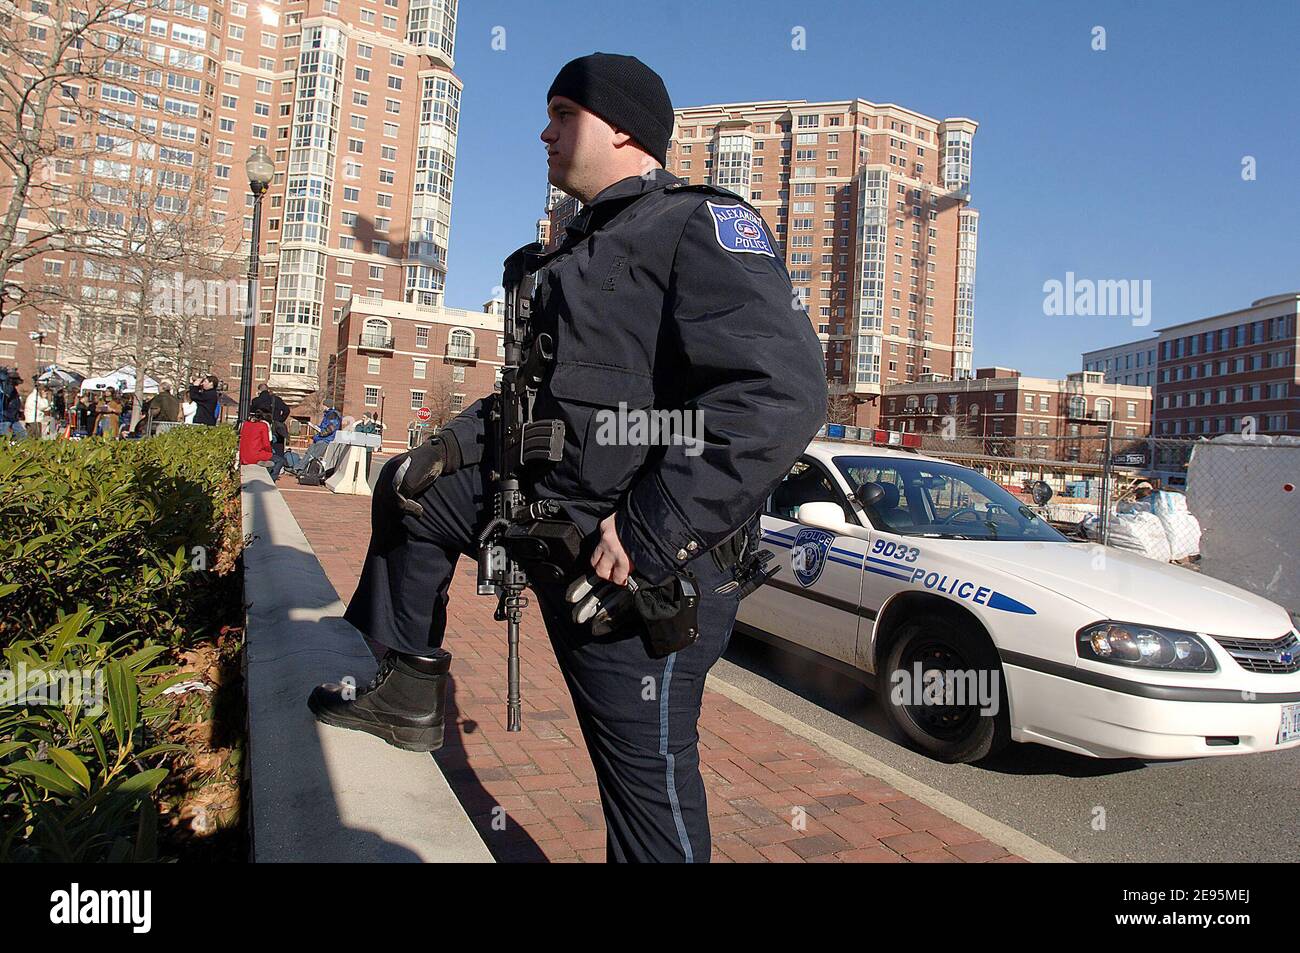 Virginia Police clamped tight security around the Federal court buildings on Monday 6 February in the Washington suburb, for the start of jury selection for the trial of Zacarias Moussaoui, the only person prosecuted in the United States for the September 11 attacks. Five hundred potential jurors were summoned to court for a selection process which will take a month, and produce a 12 person jury and six alternates. Photo by Olivier Douliery/ABACAPRESS.COM Stock Photo